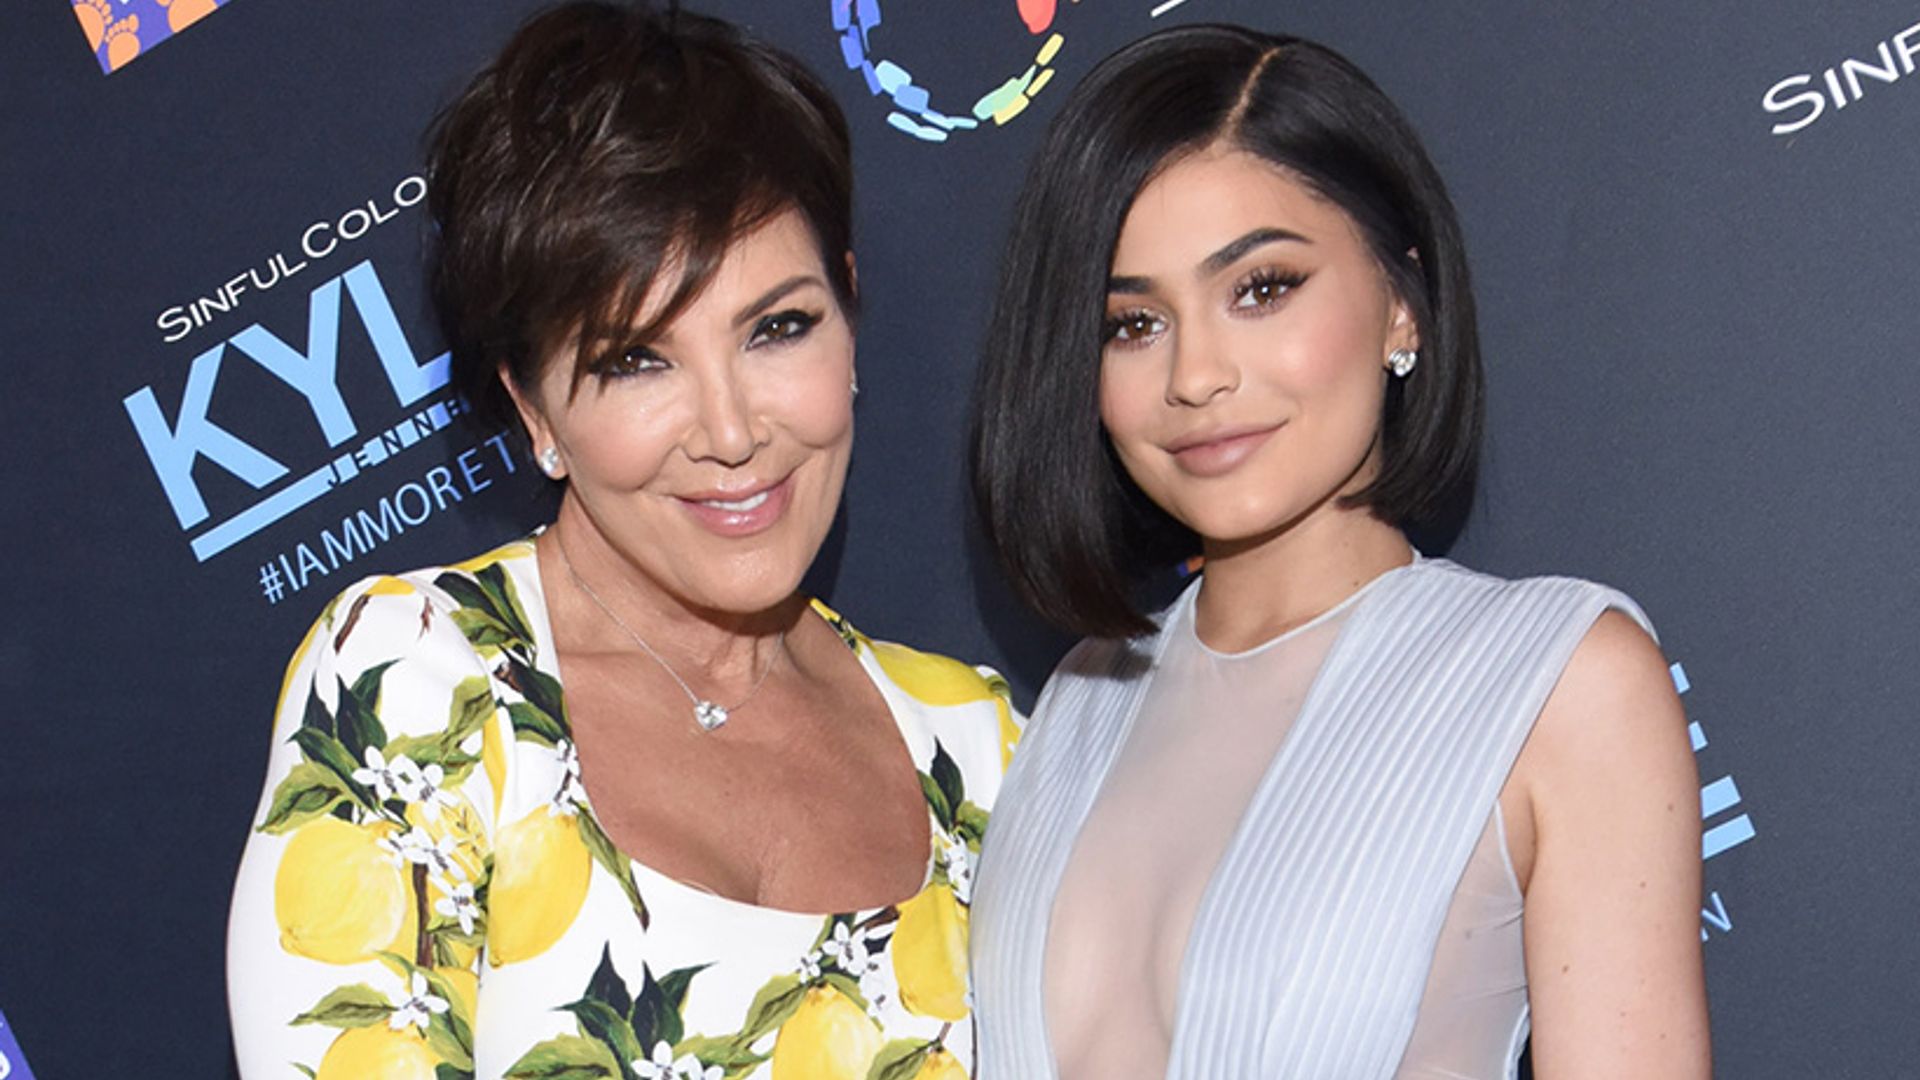 Kylie Jenner unveils ‘Momager’ beauty collection dedicated to mum Kris - and it looks amazing